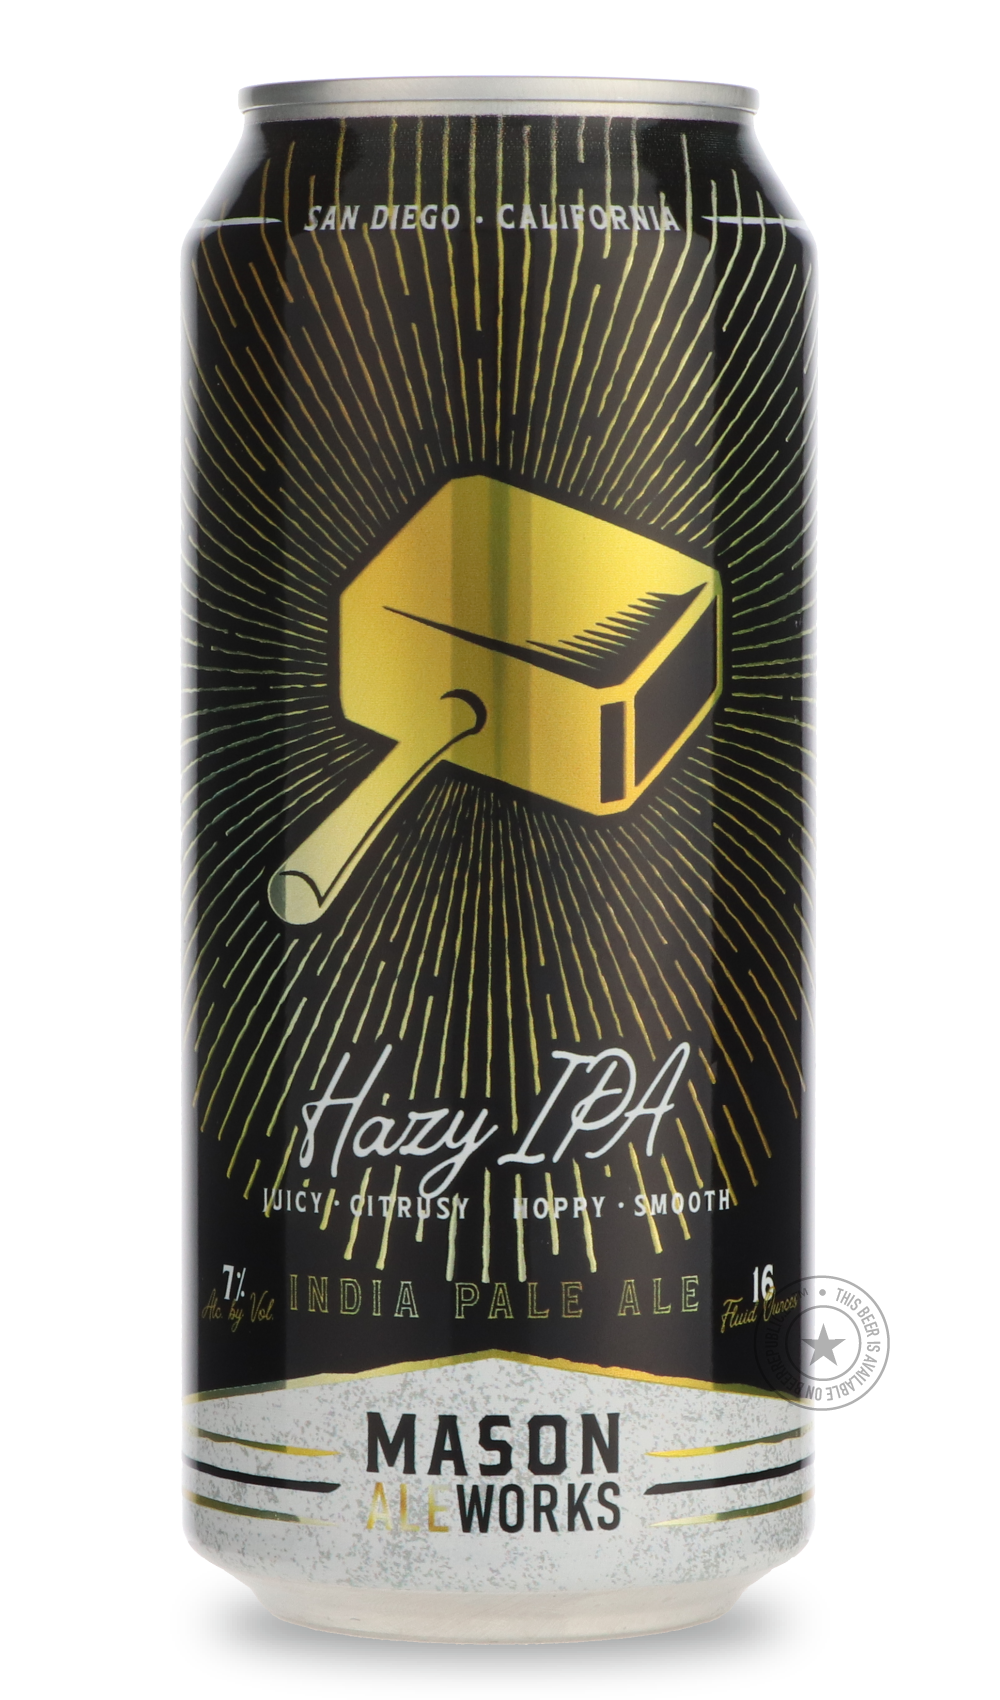 -Mason Ale Works- Hazy IPA-IPA- Only @ Beer Republic - The best online beer store for American & Canadian craft beer - Buy beer online from the USA and Canada - Bier online kopen - Amerikaans bier kopen - Craft beer store - Craft beer kopen - Amerikanisch bier kaufen - Bier online kaufen - Acheter biere online - IPA - Stout - Porter - New England IPA - Hazy IPA - Imperial Stout - Barrel Aged - Barrel Aged Imperial Stout - Brown - Dark beer - Blond - Blonde - Pilsner - Lager - Wheat - Weizen - Amber - Barley